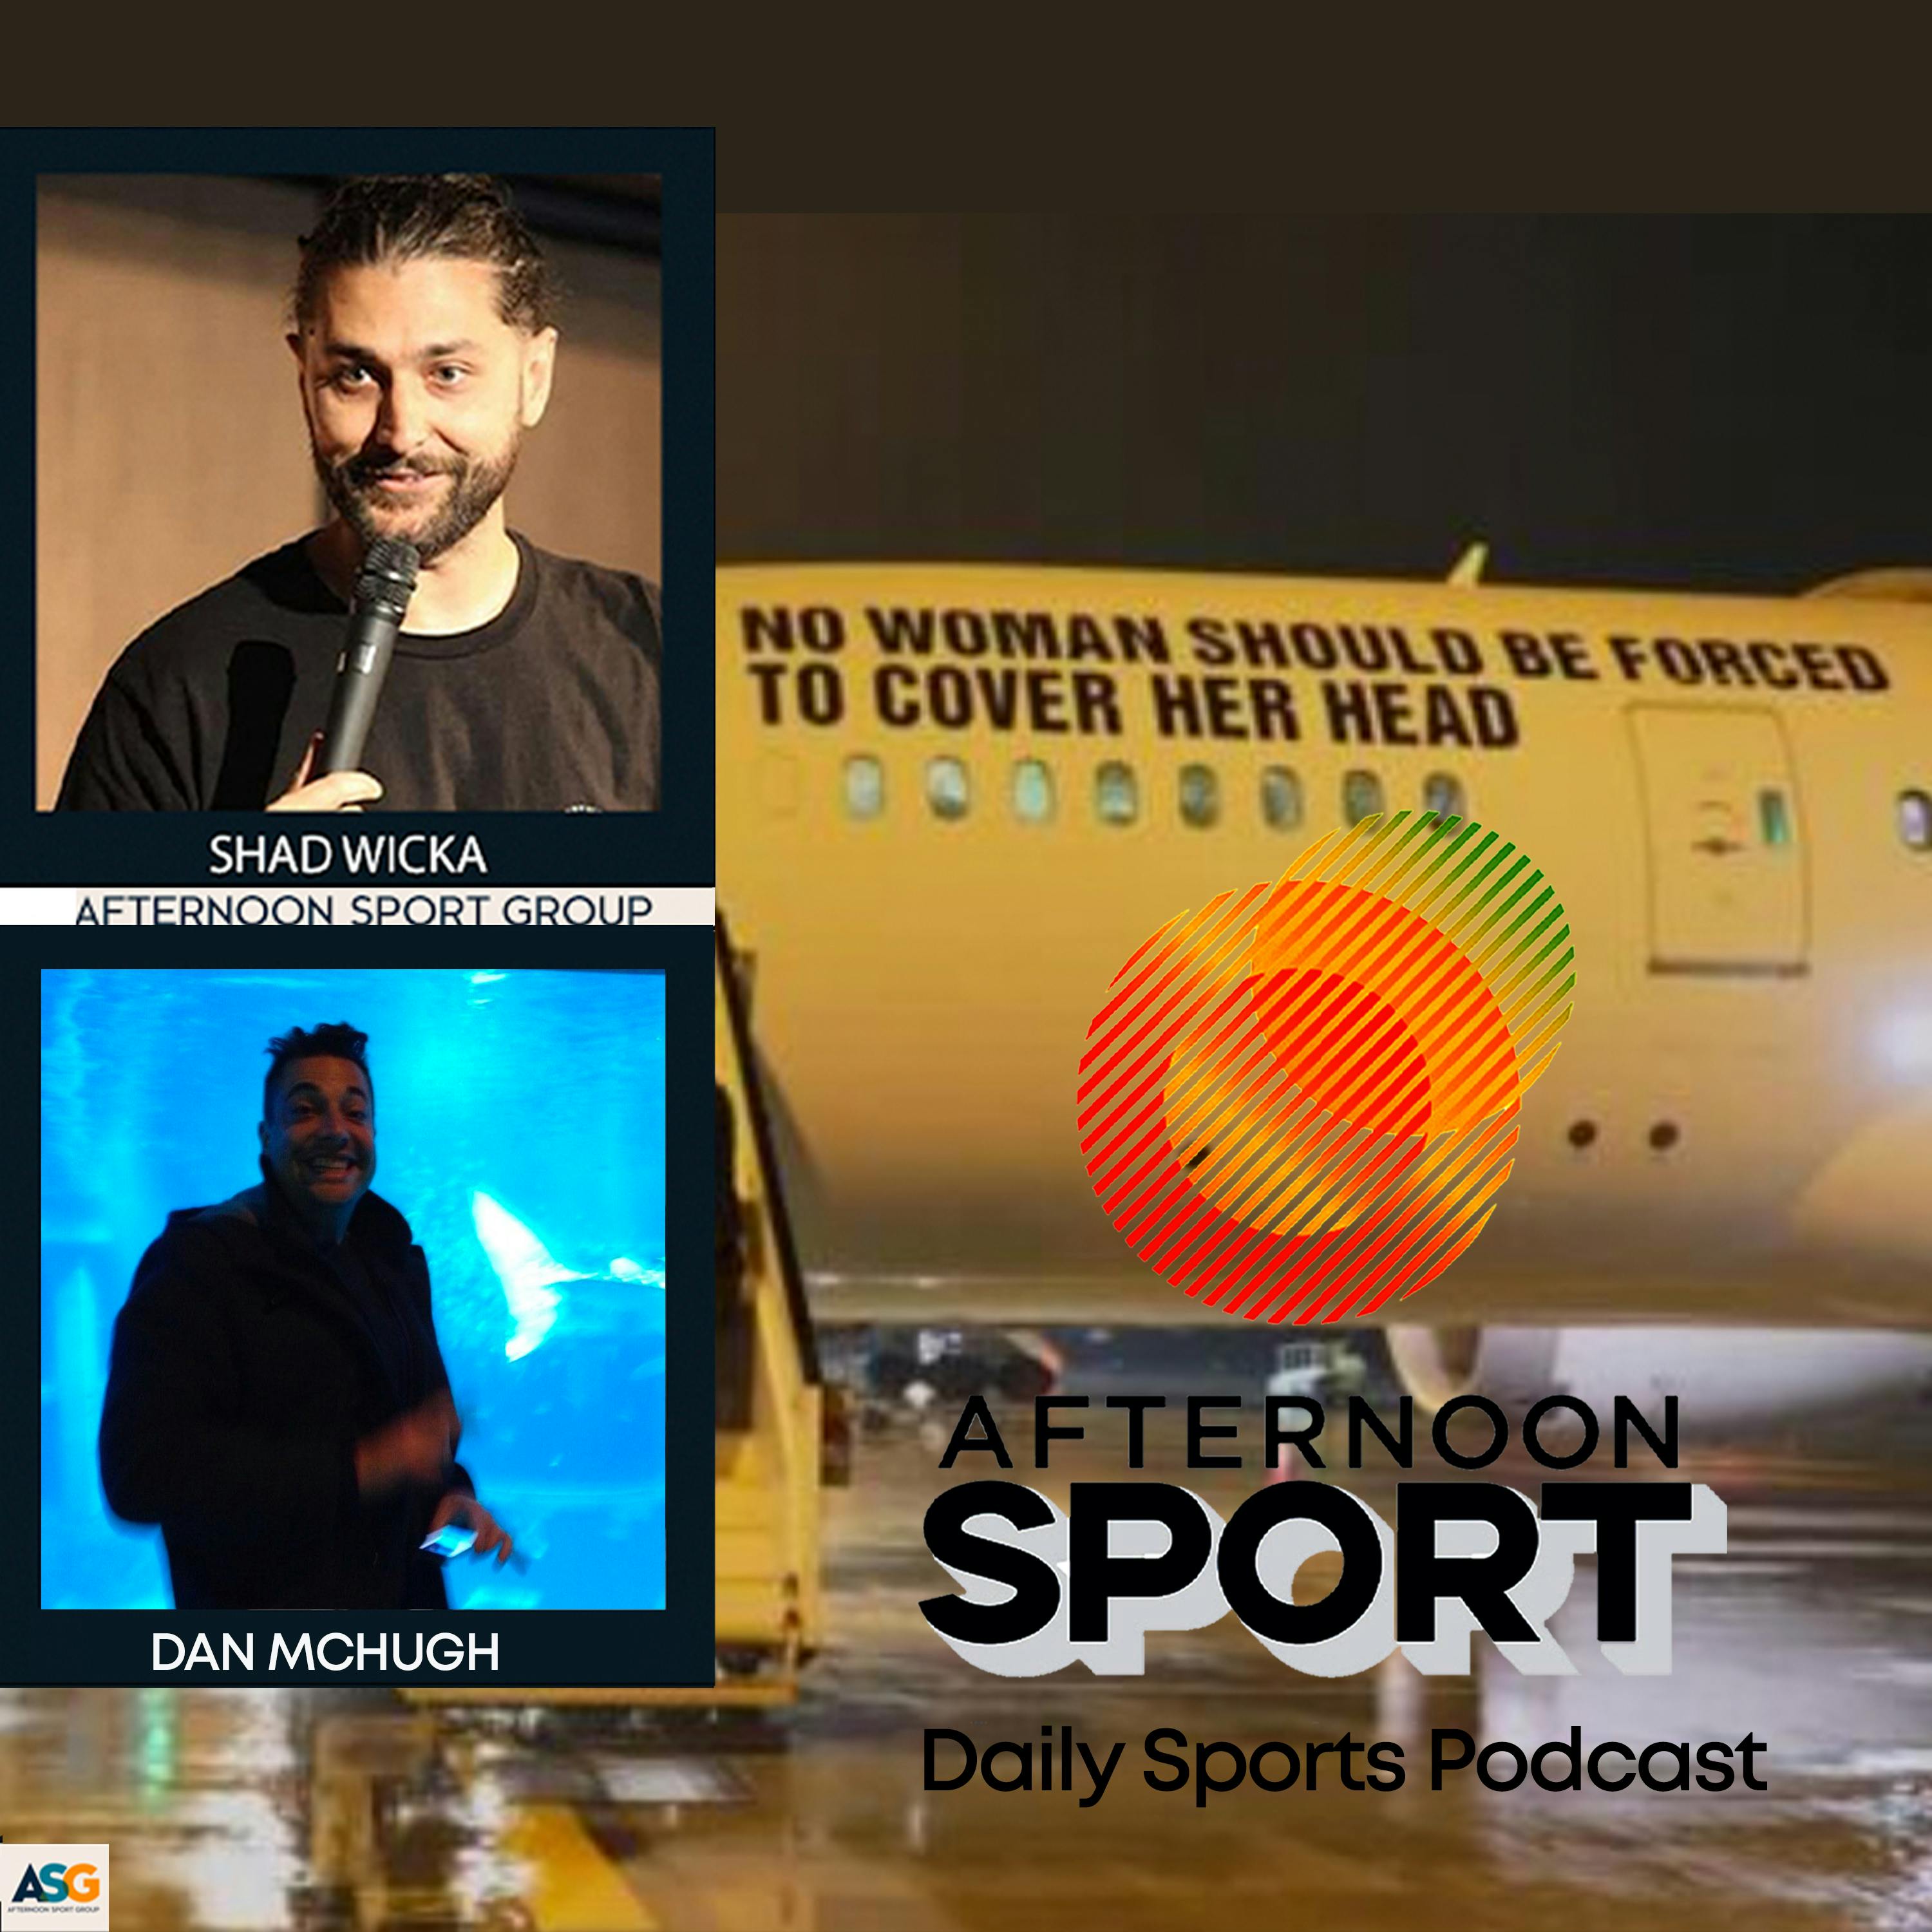 6th July Shad Wicka and Dan McHugh: Amen to the spirit of cricket, some great games at Wimbledon, teams arriving for the Women's Wold Cup, NRL boycotts, AFL nude pics + more!